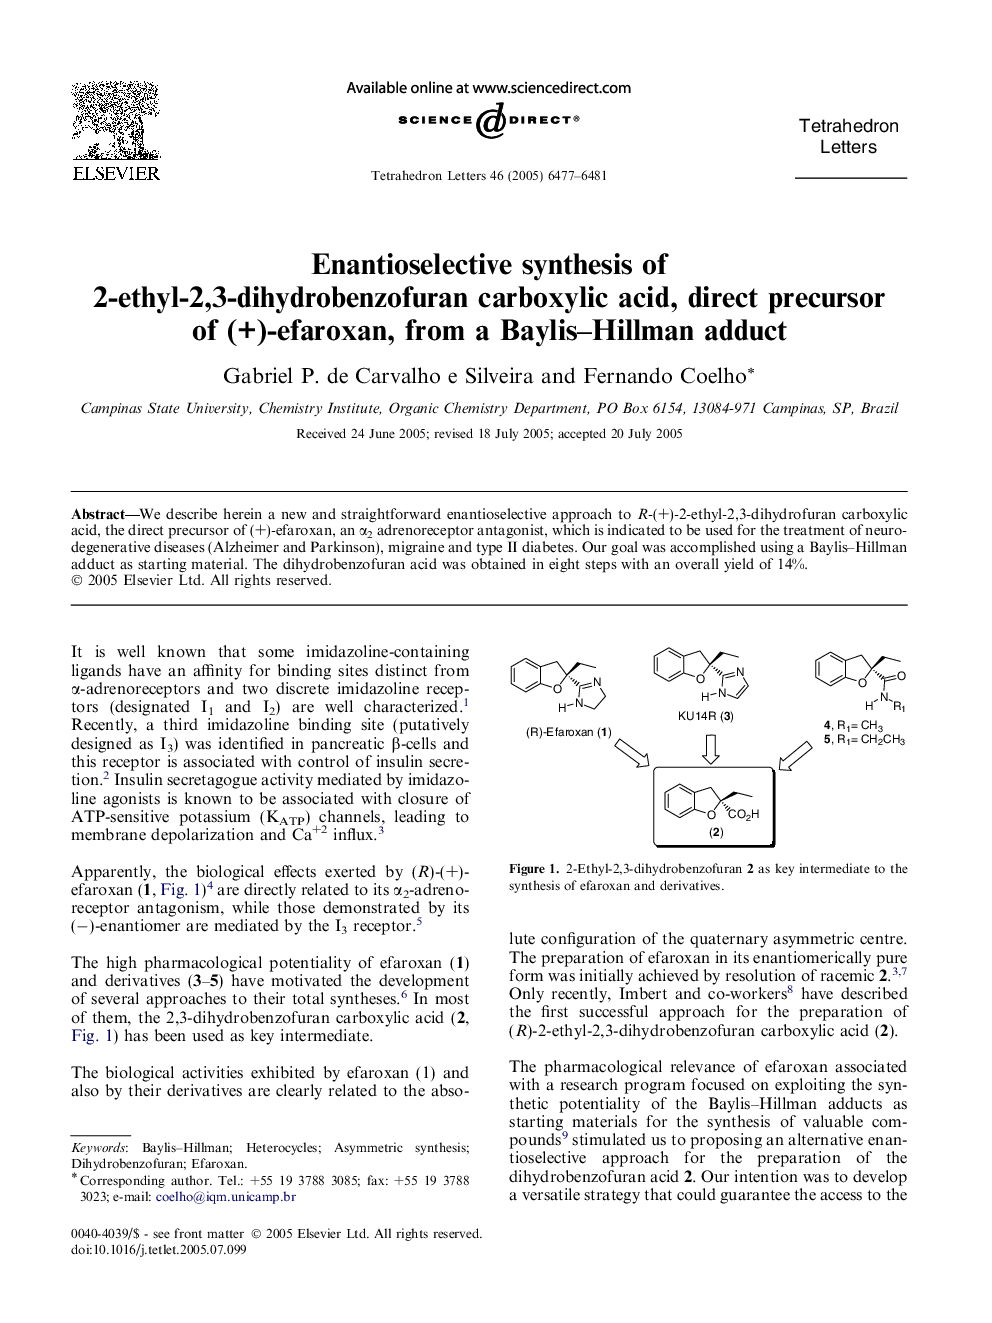 Enantioselective synthesis of 2-ethyl-2,3-dihydrobenzofuran carboxylic acid, direct precursor of (+)-efaroxan, from a Baylis-Hillman adduct